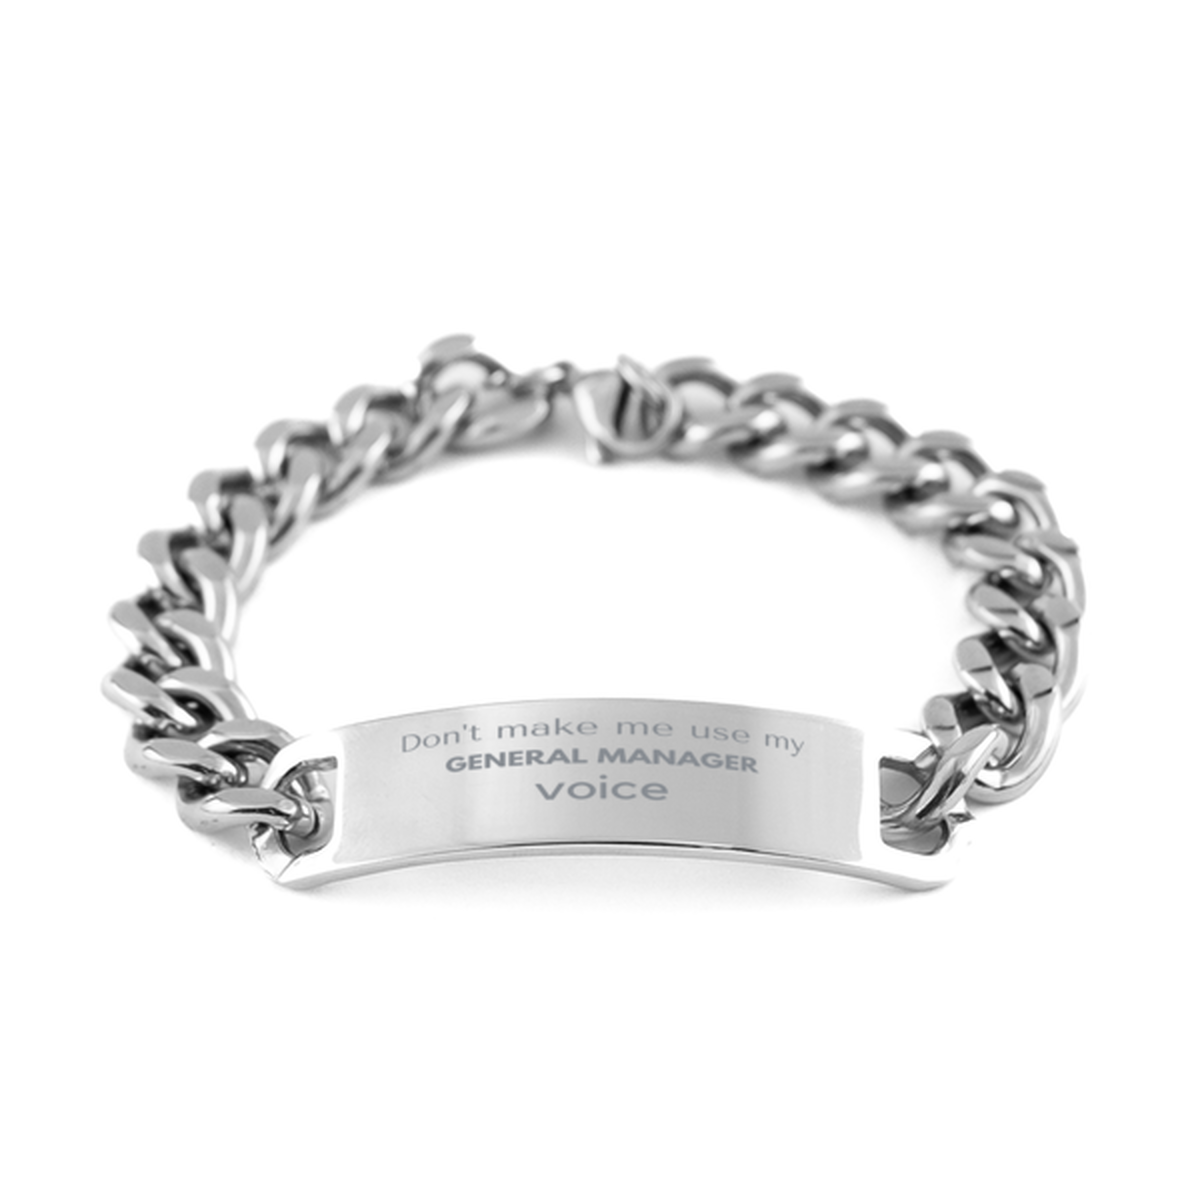 Don't make me use my General Manager voice, Sarcasm General Manager Gifts, Christmas General Manager Cuban Chain Stainless Steel Bracelet Birthday Unique Gifts For General Manager Coworkers, Men, Women, Colleague, Friends